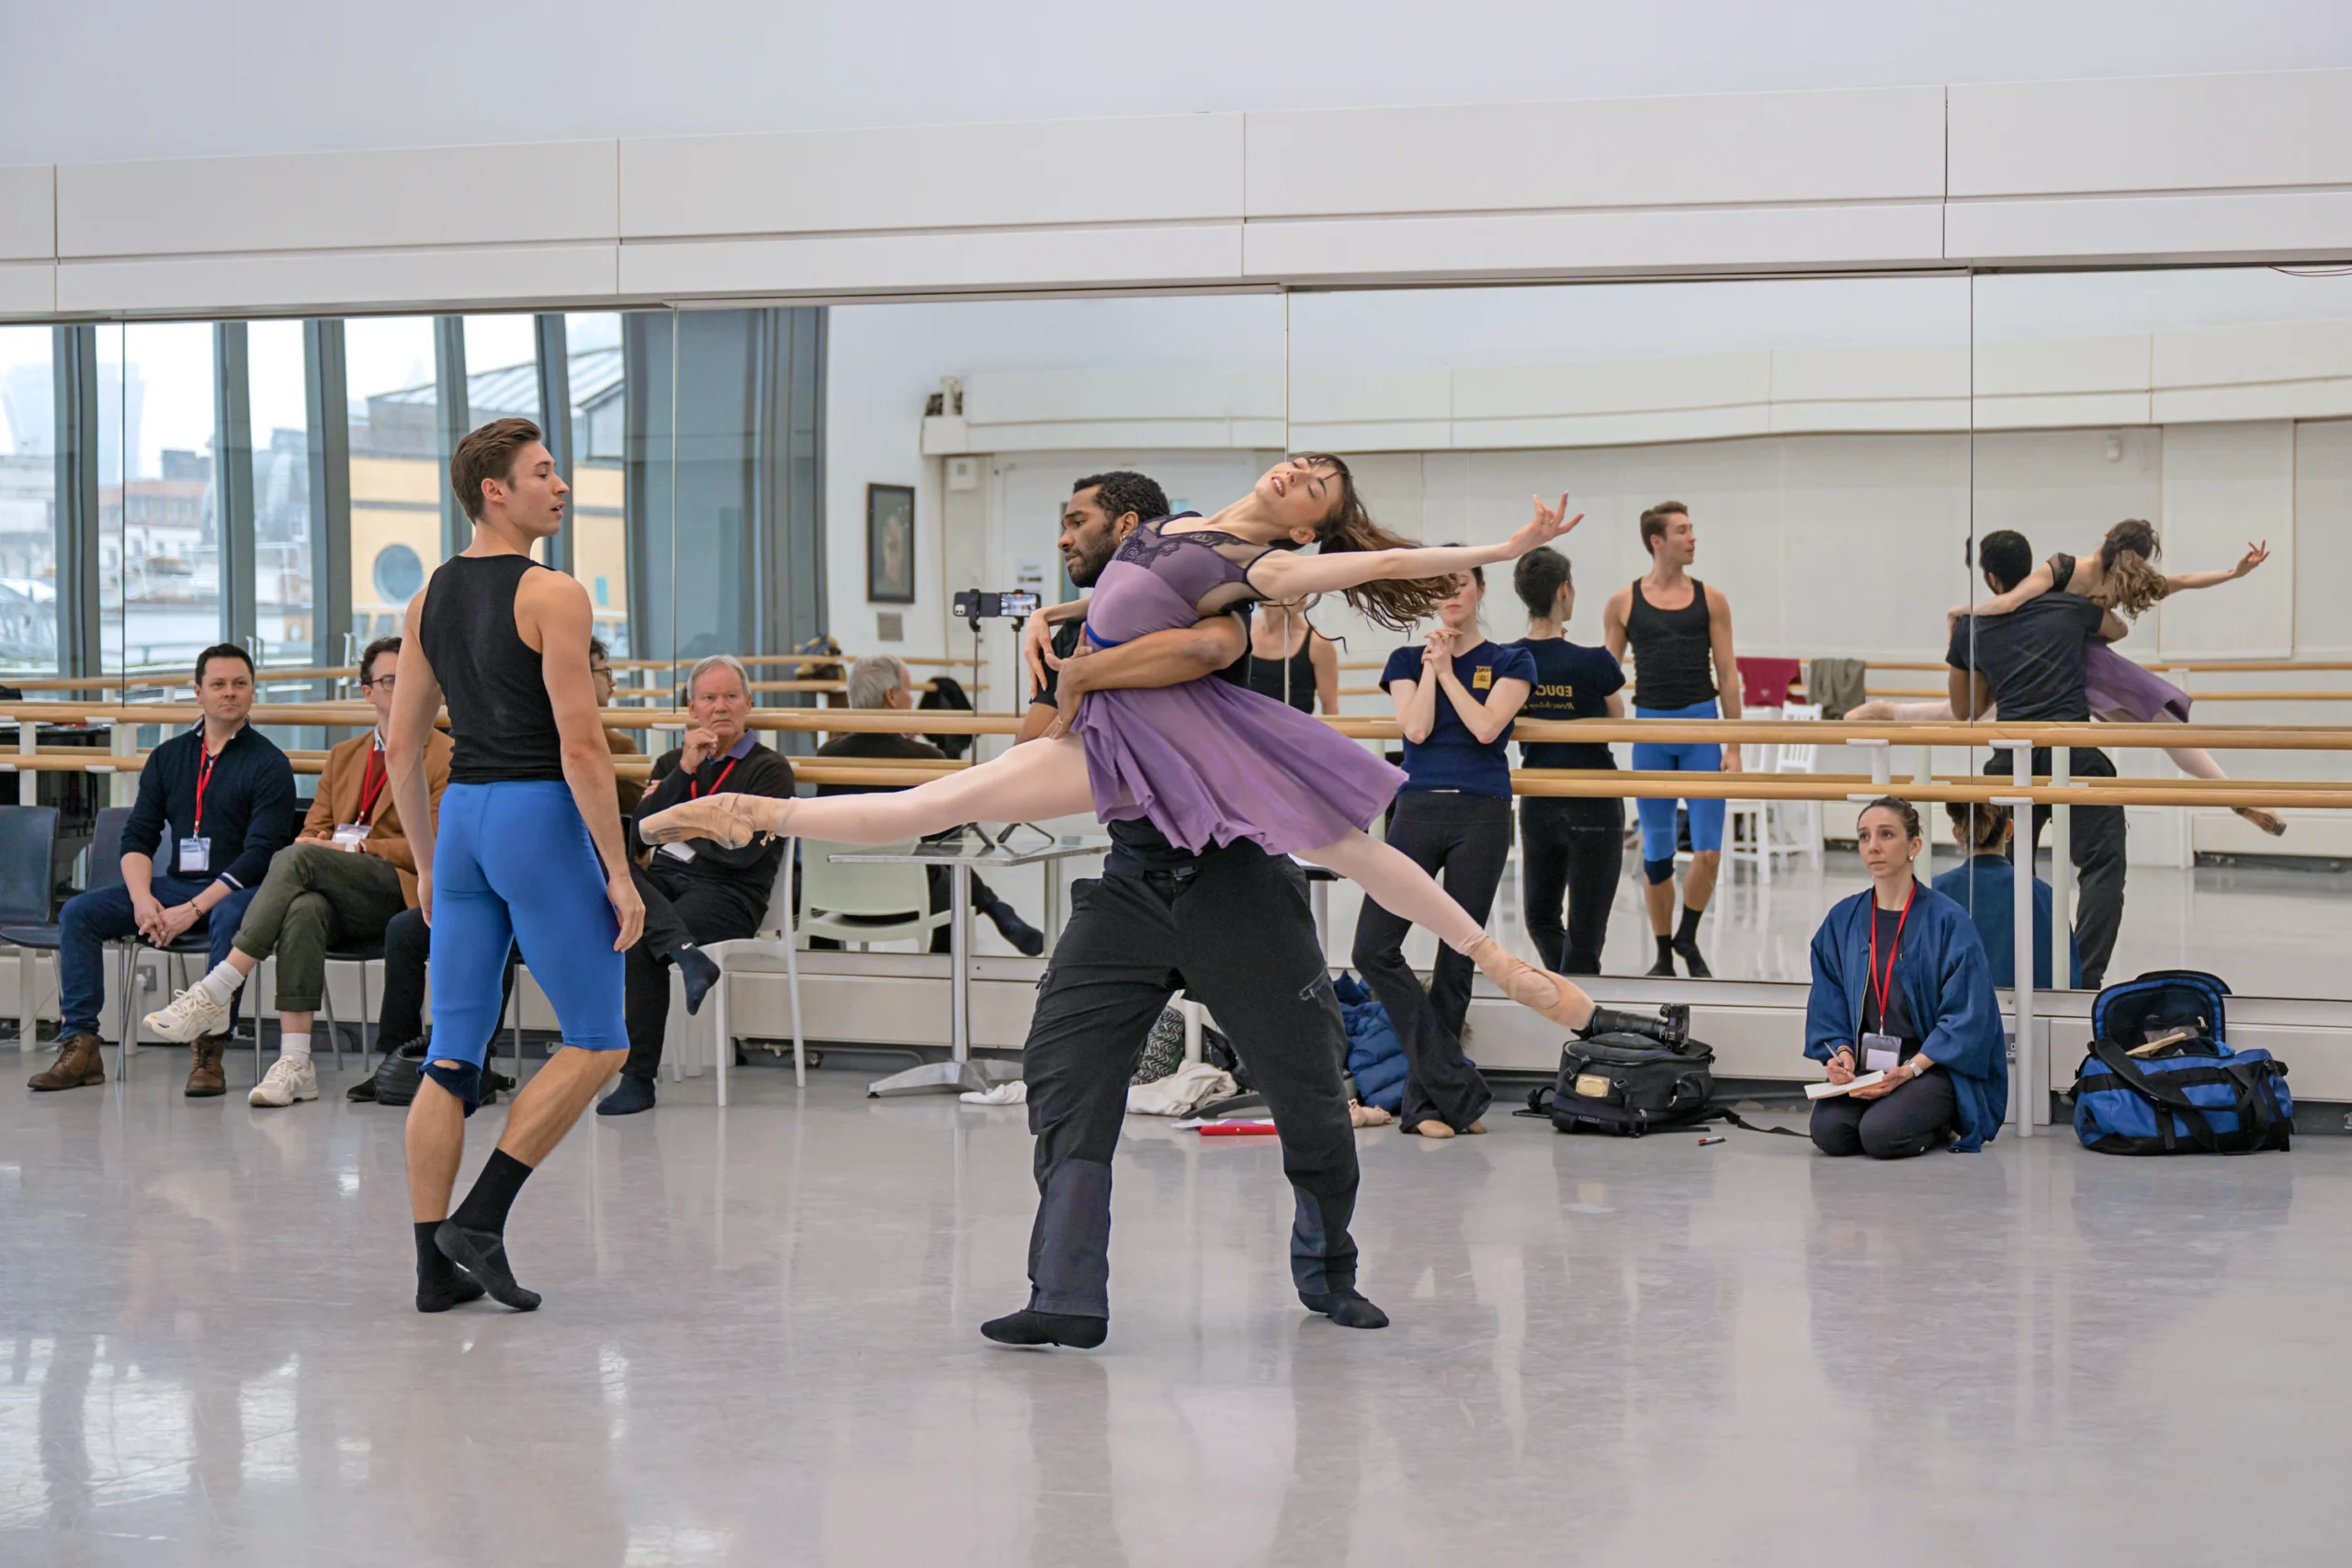 In a large dance studio, a group of dancers and rehearsal directors watch three dancers rehearse. A male dancer lifts a female dancer in a spinning lift, her legs in a split, and she arches backward. A second male dancer watches and walks close by.